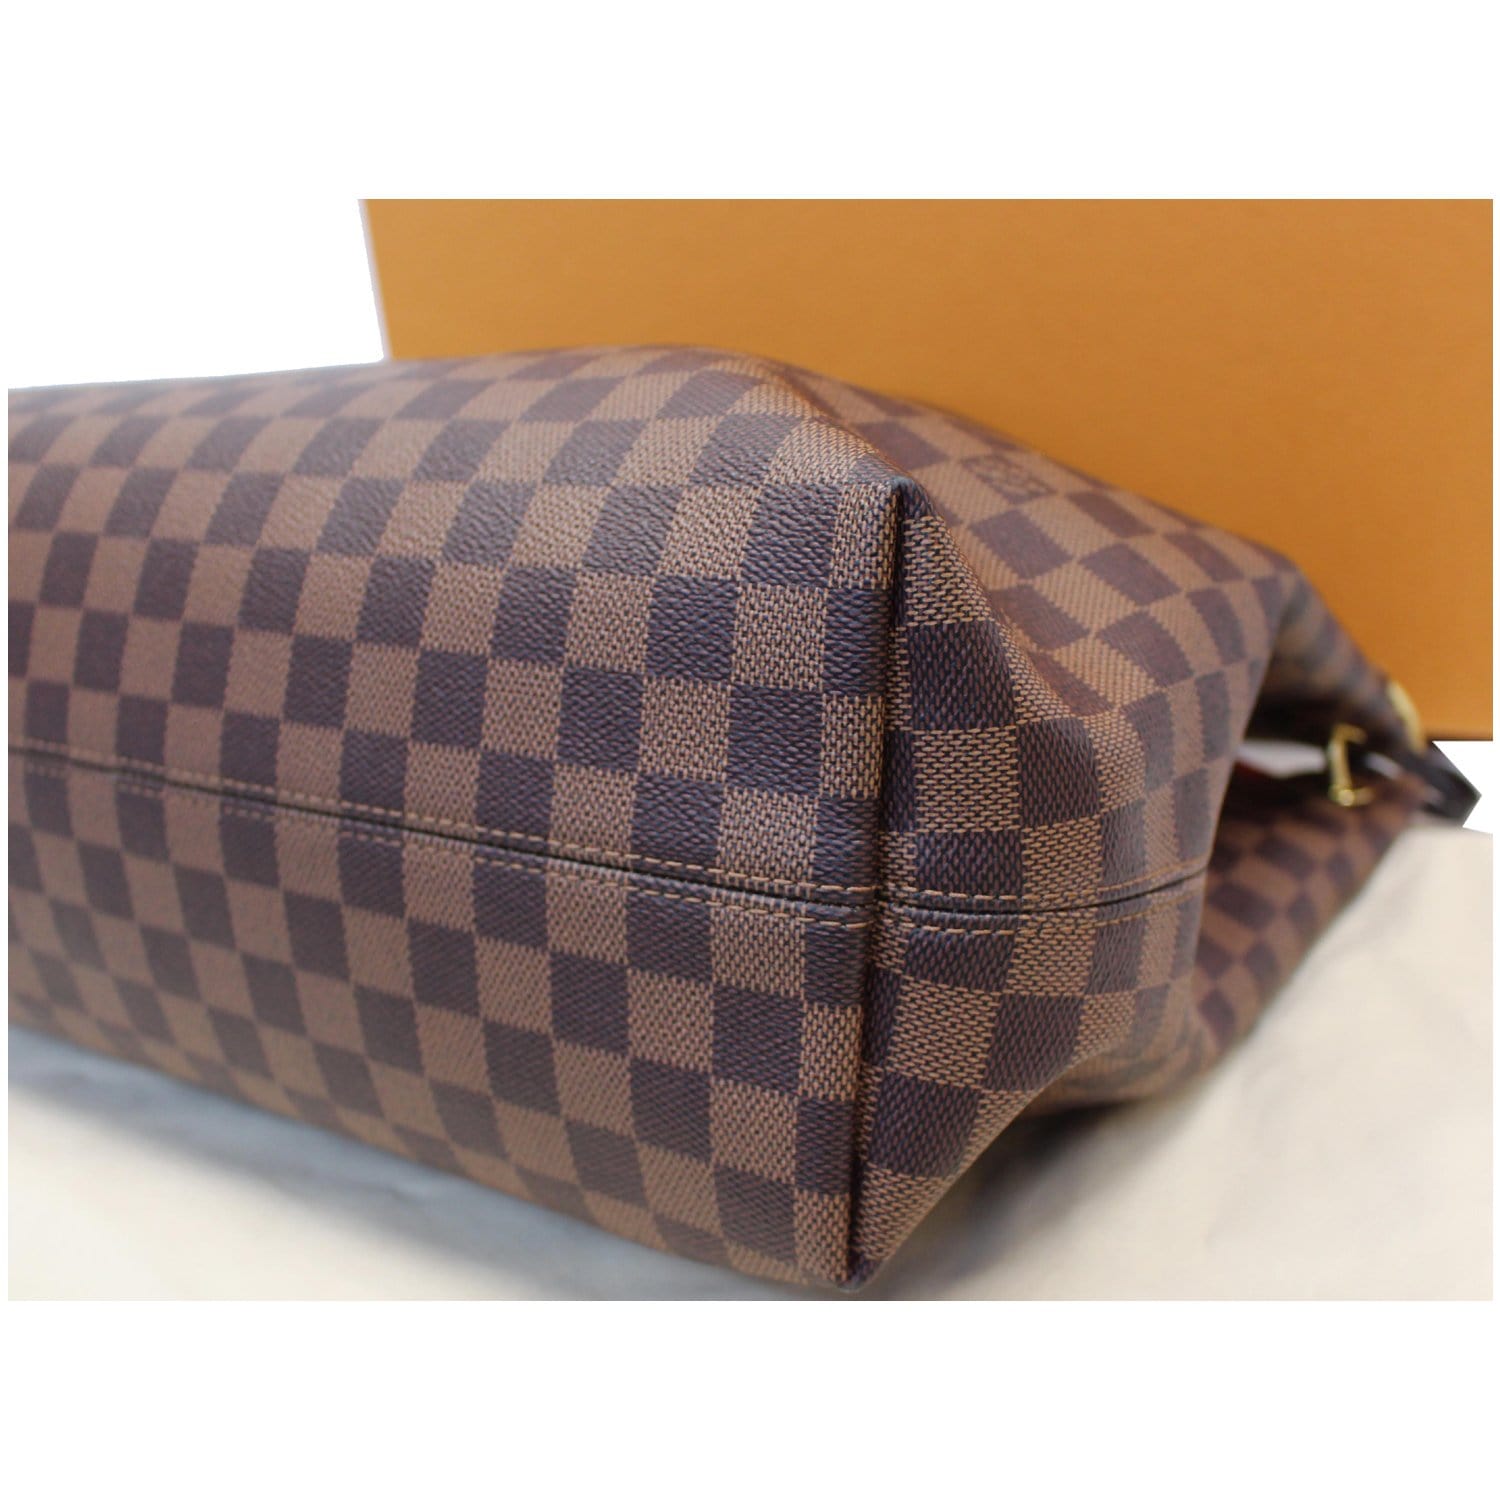 🍁sold🍂 Authentic Preloved Graceful MM, Damier Ebene, Cherry